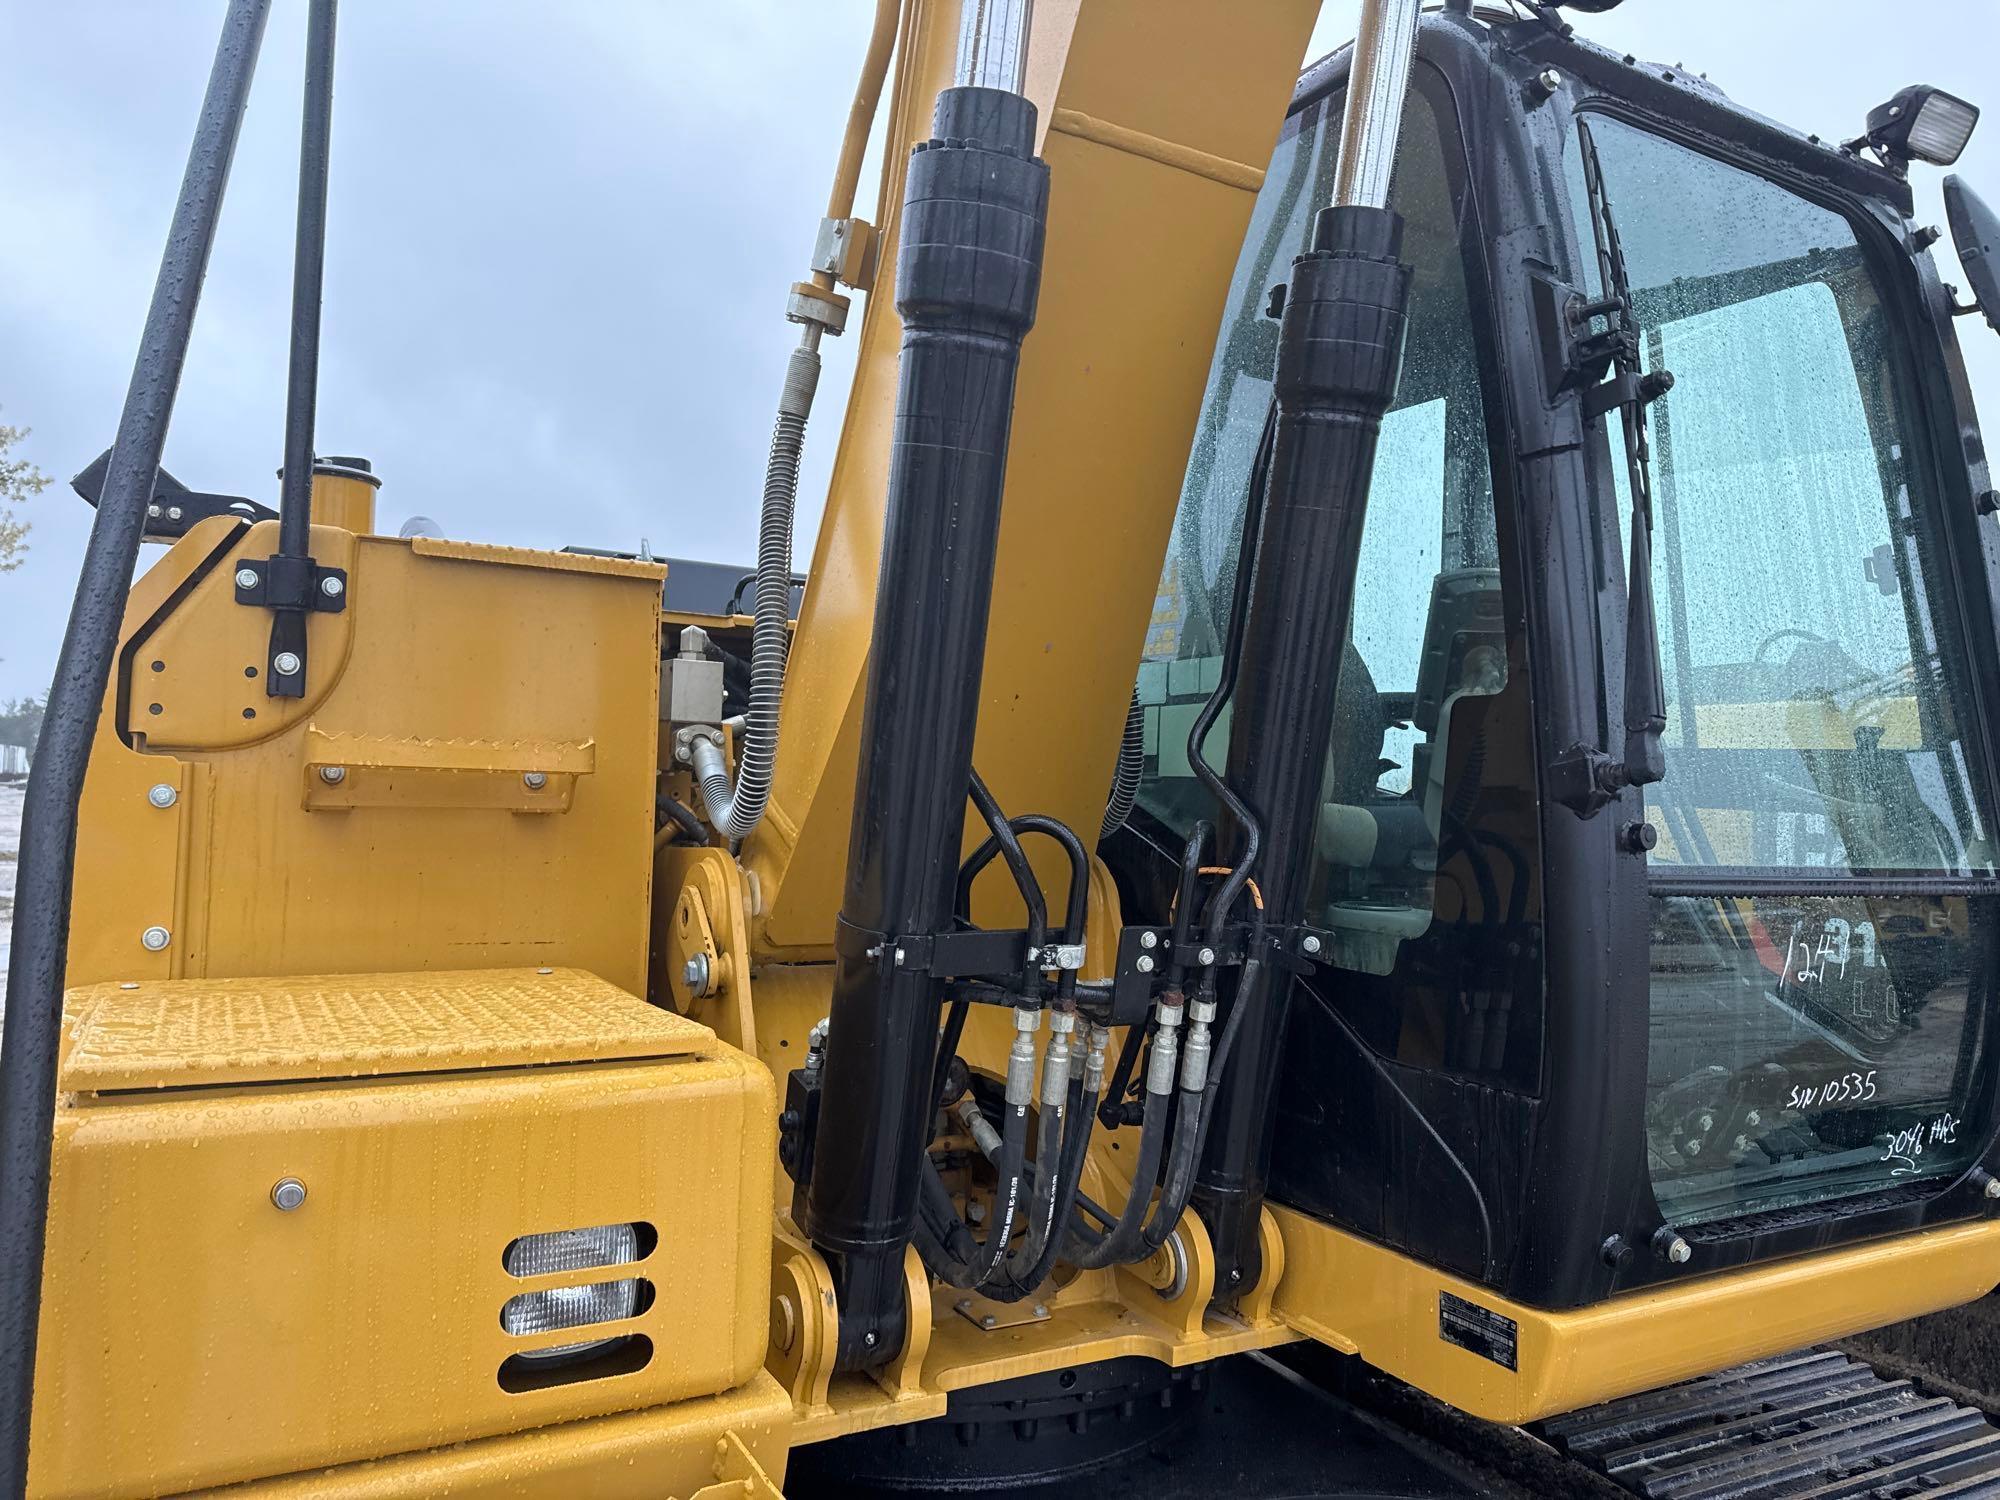 2021 CAT 313FLGC HYDRAULIC EXCAVATOR SN:GJD10535 powered by Cat diesel engine, equipped with Cab,